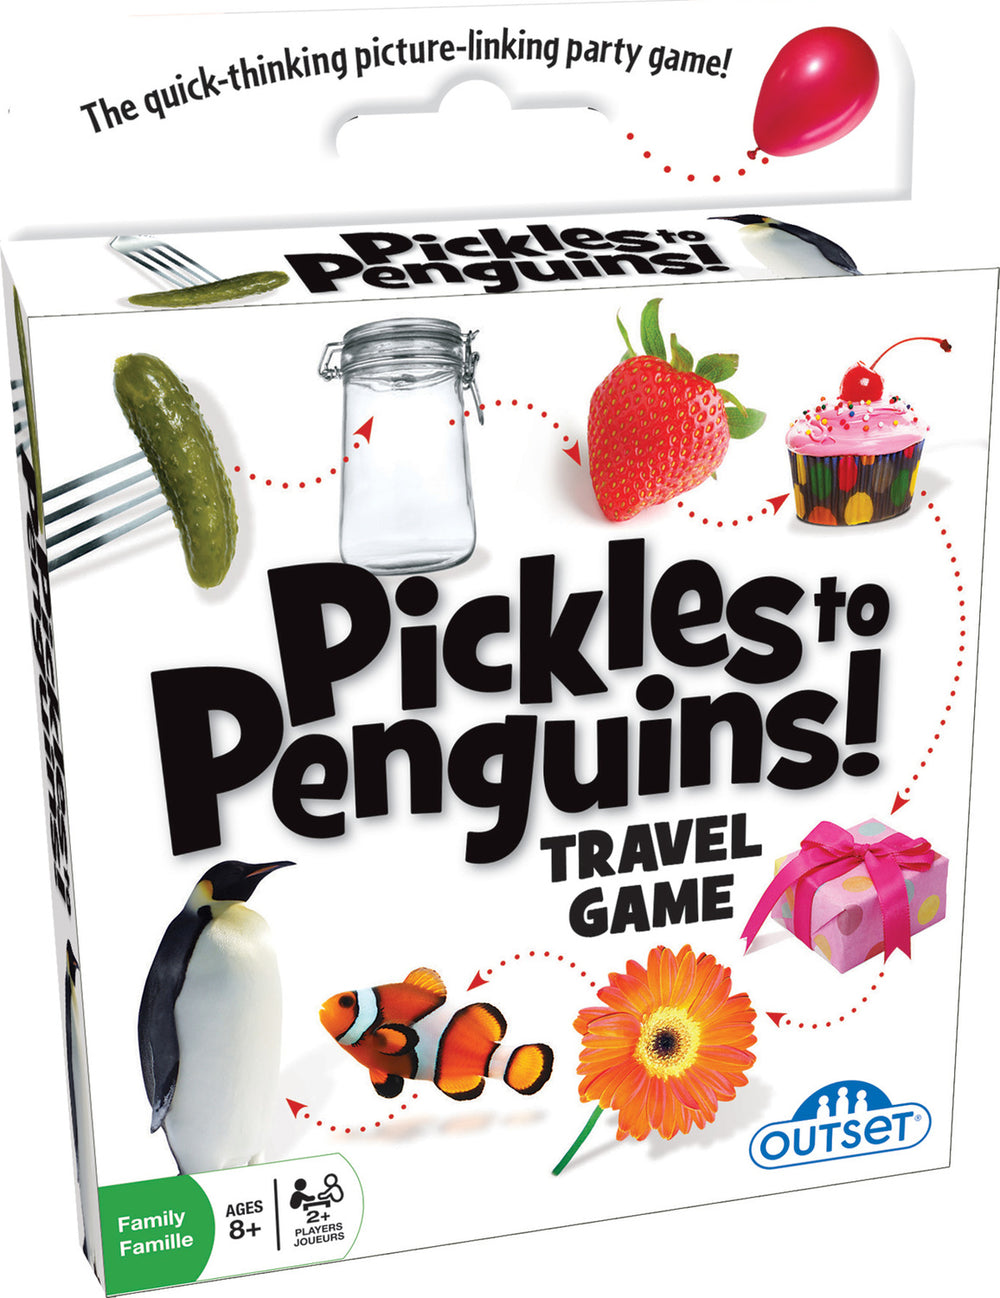 Pickles To Penguins! Travel Game